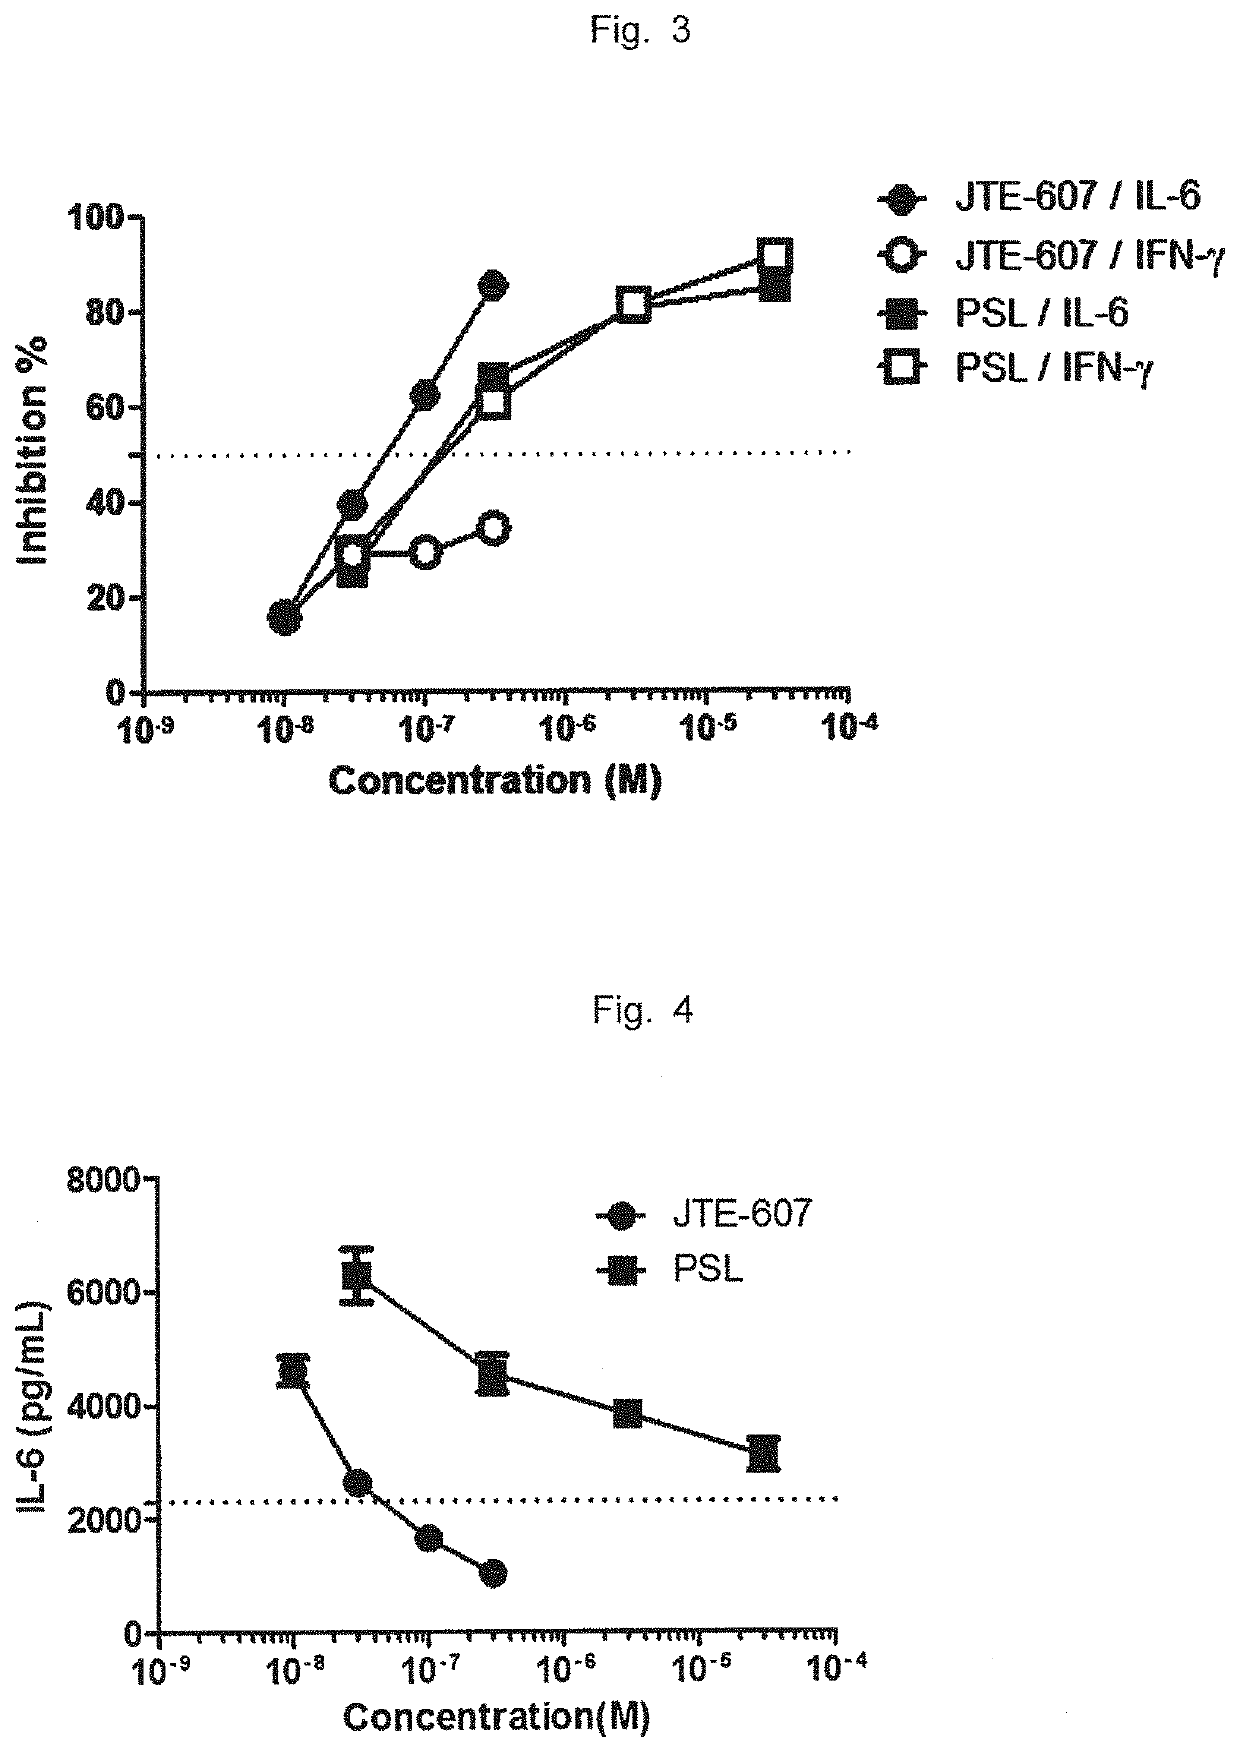 Ameliorative agent for cytokine release syndrome and so on